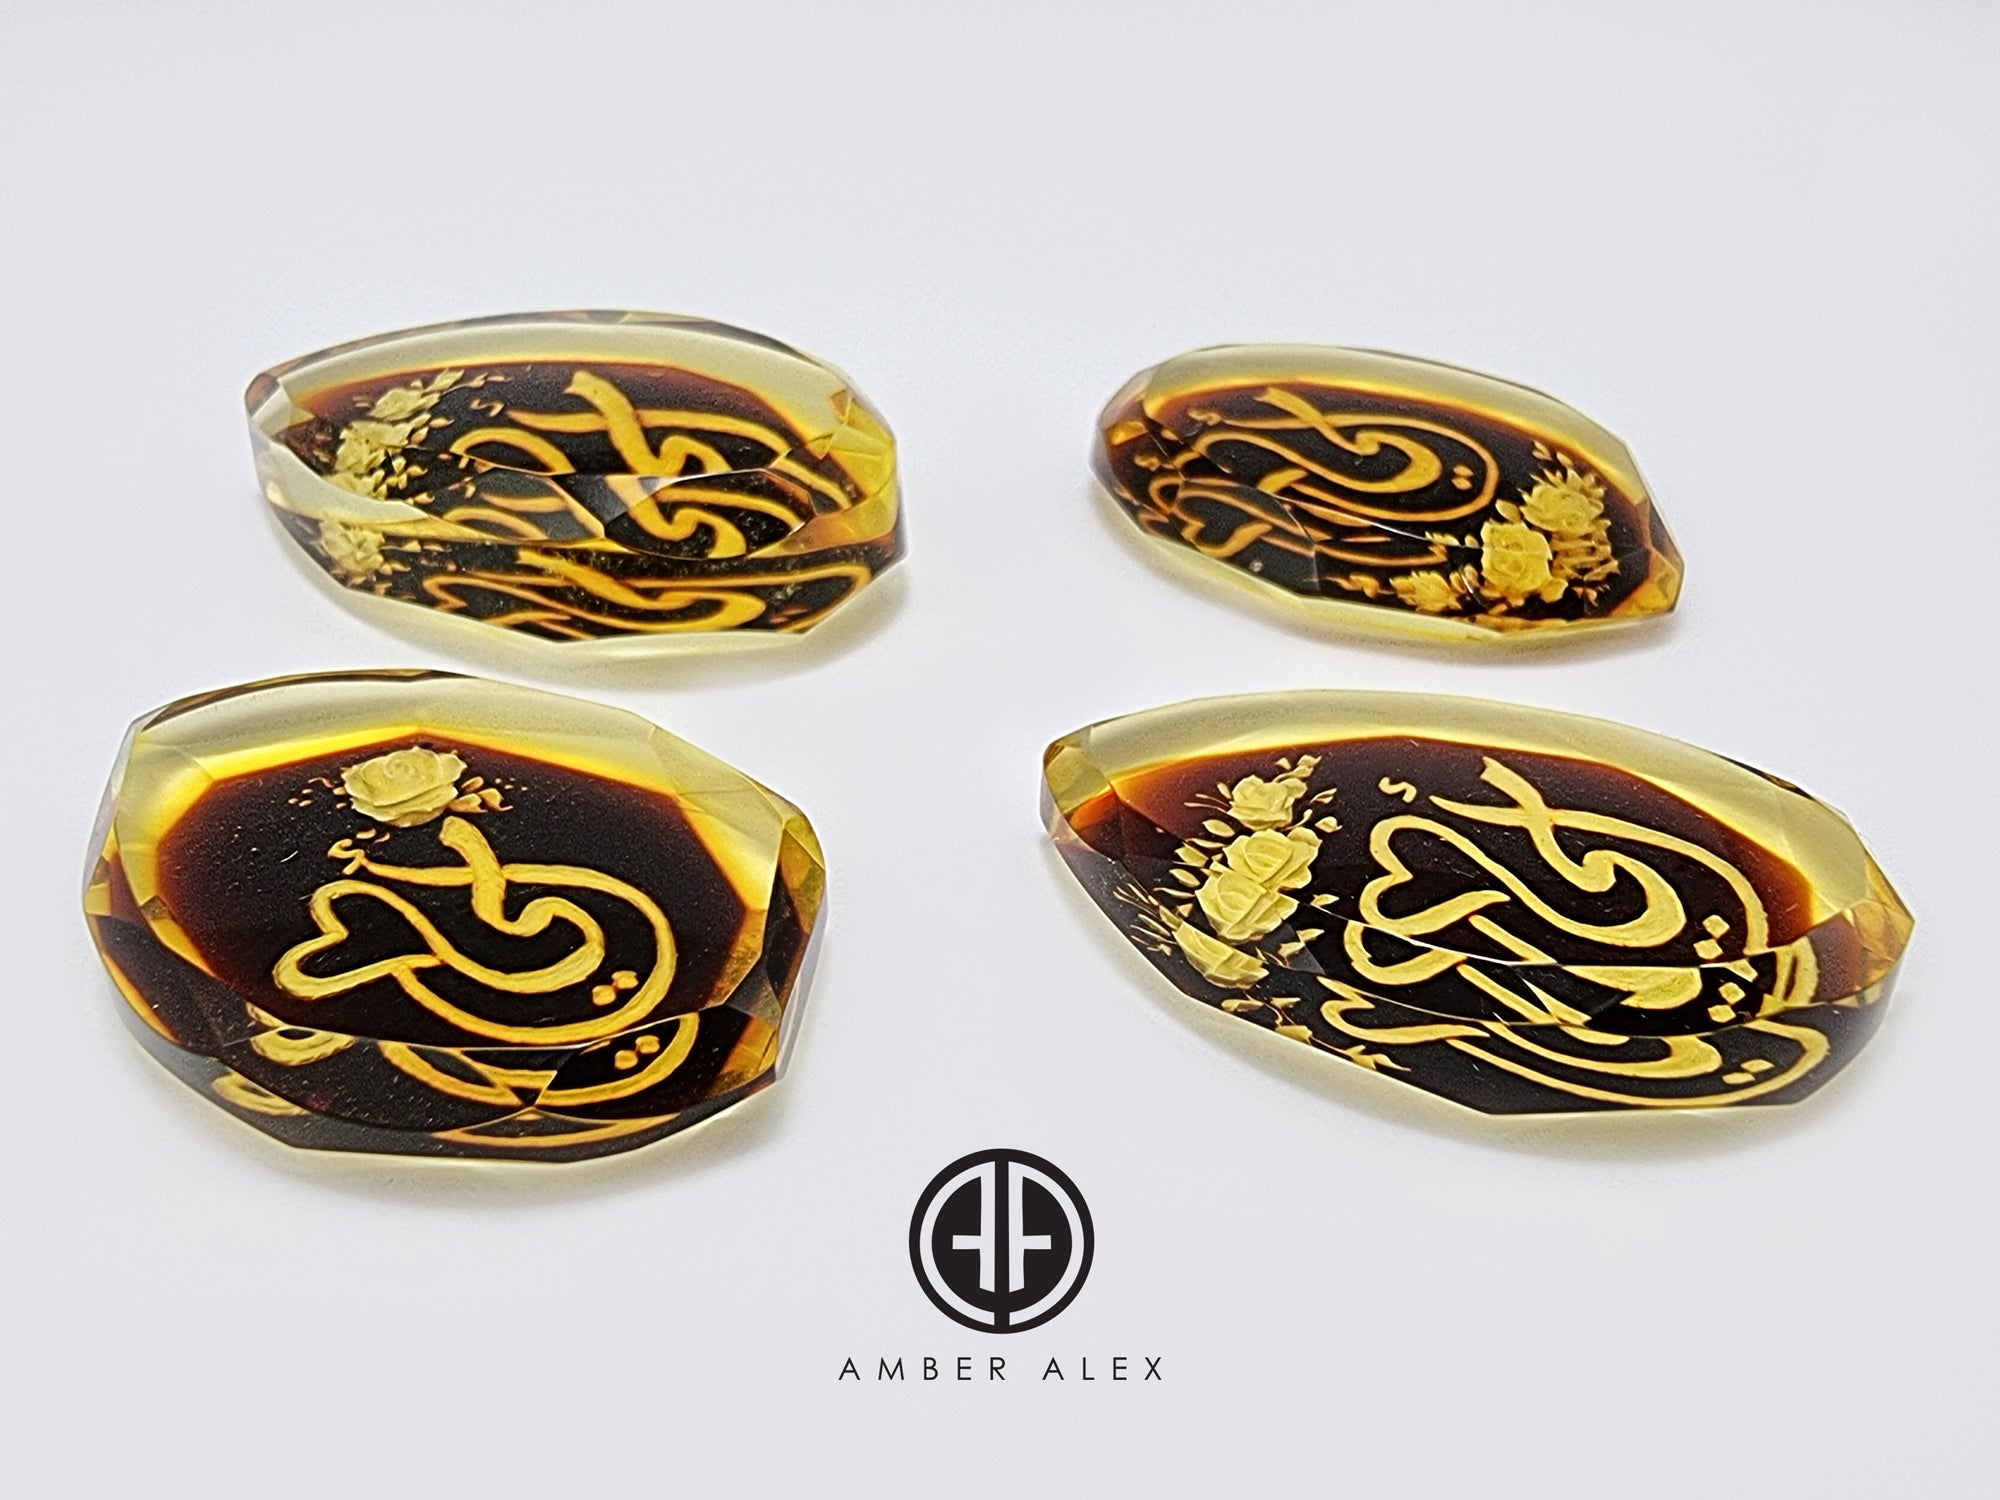 Two Tone Amber Engraved 'Mother' in Arabic Faceted Oval Shape Cabochons